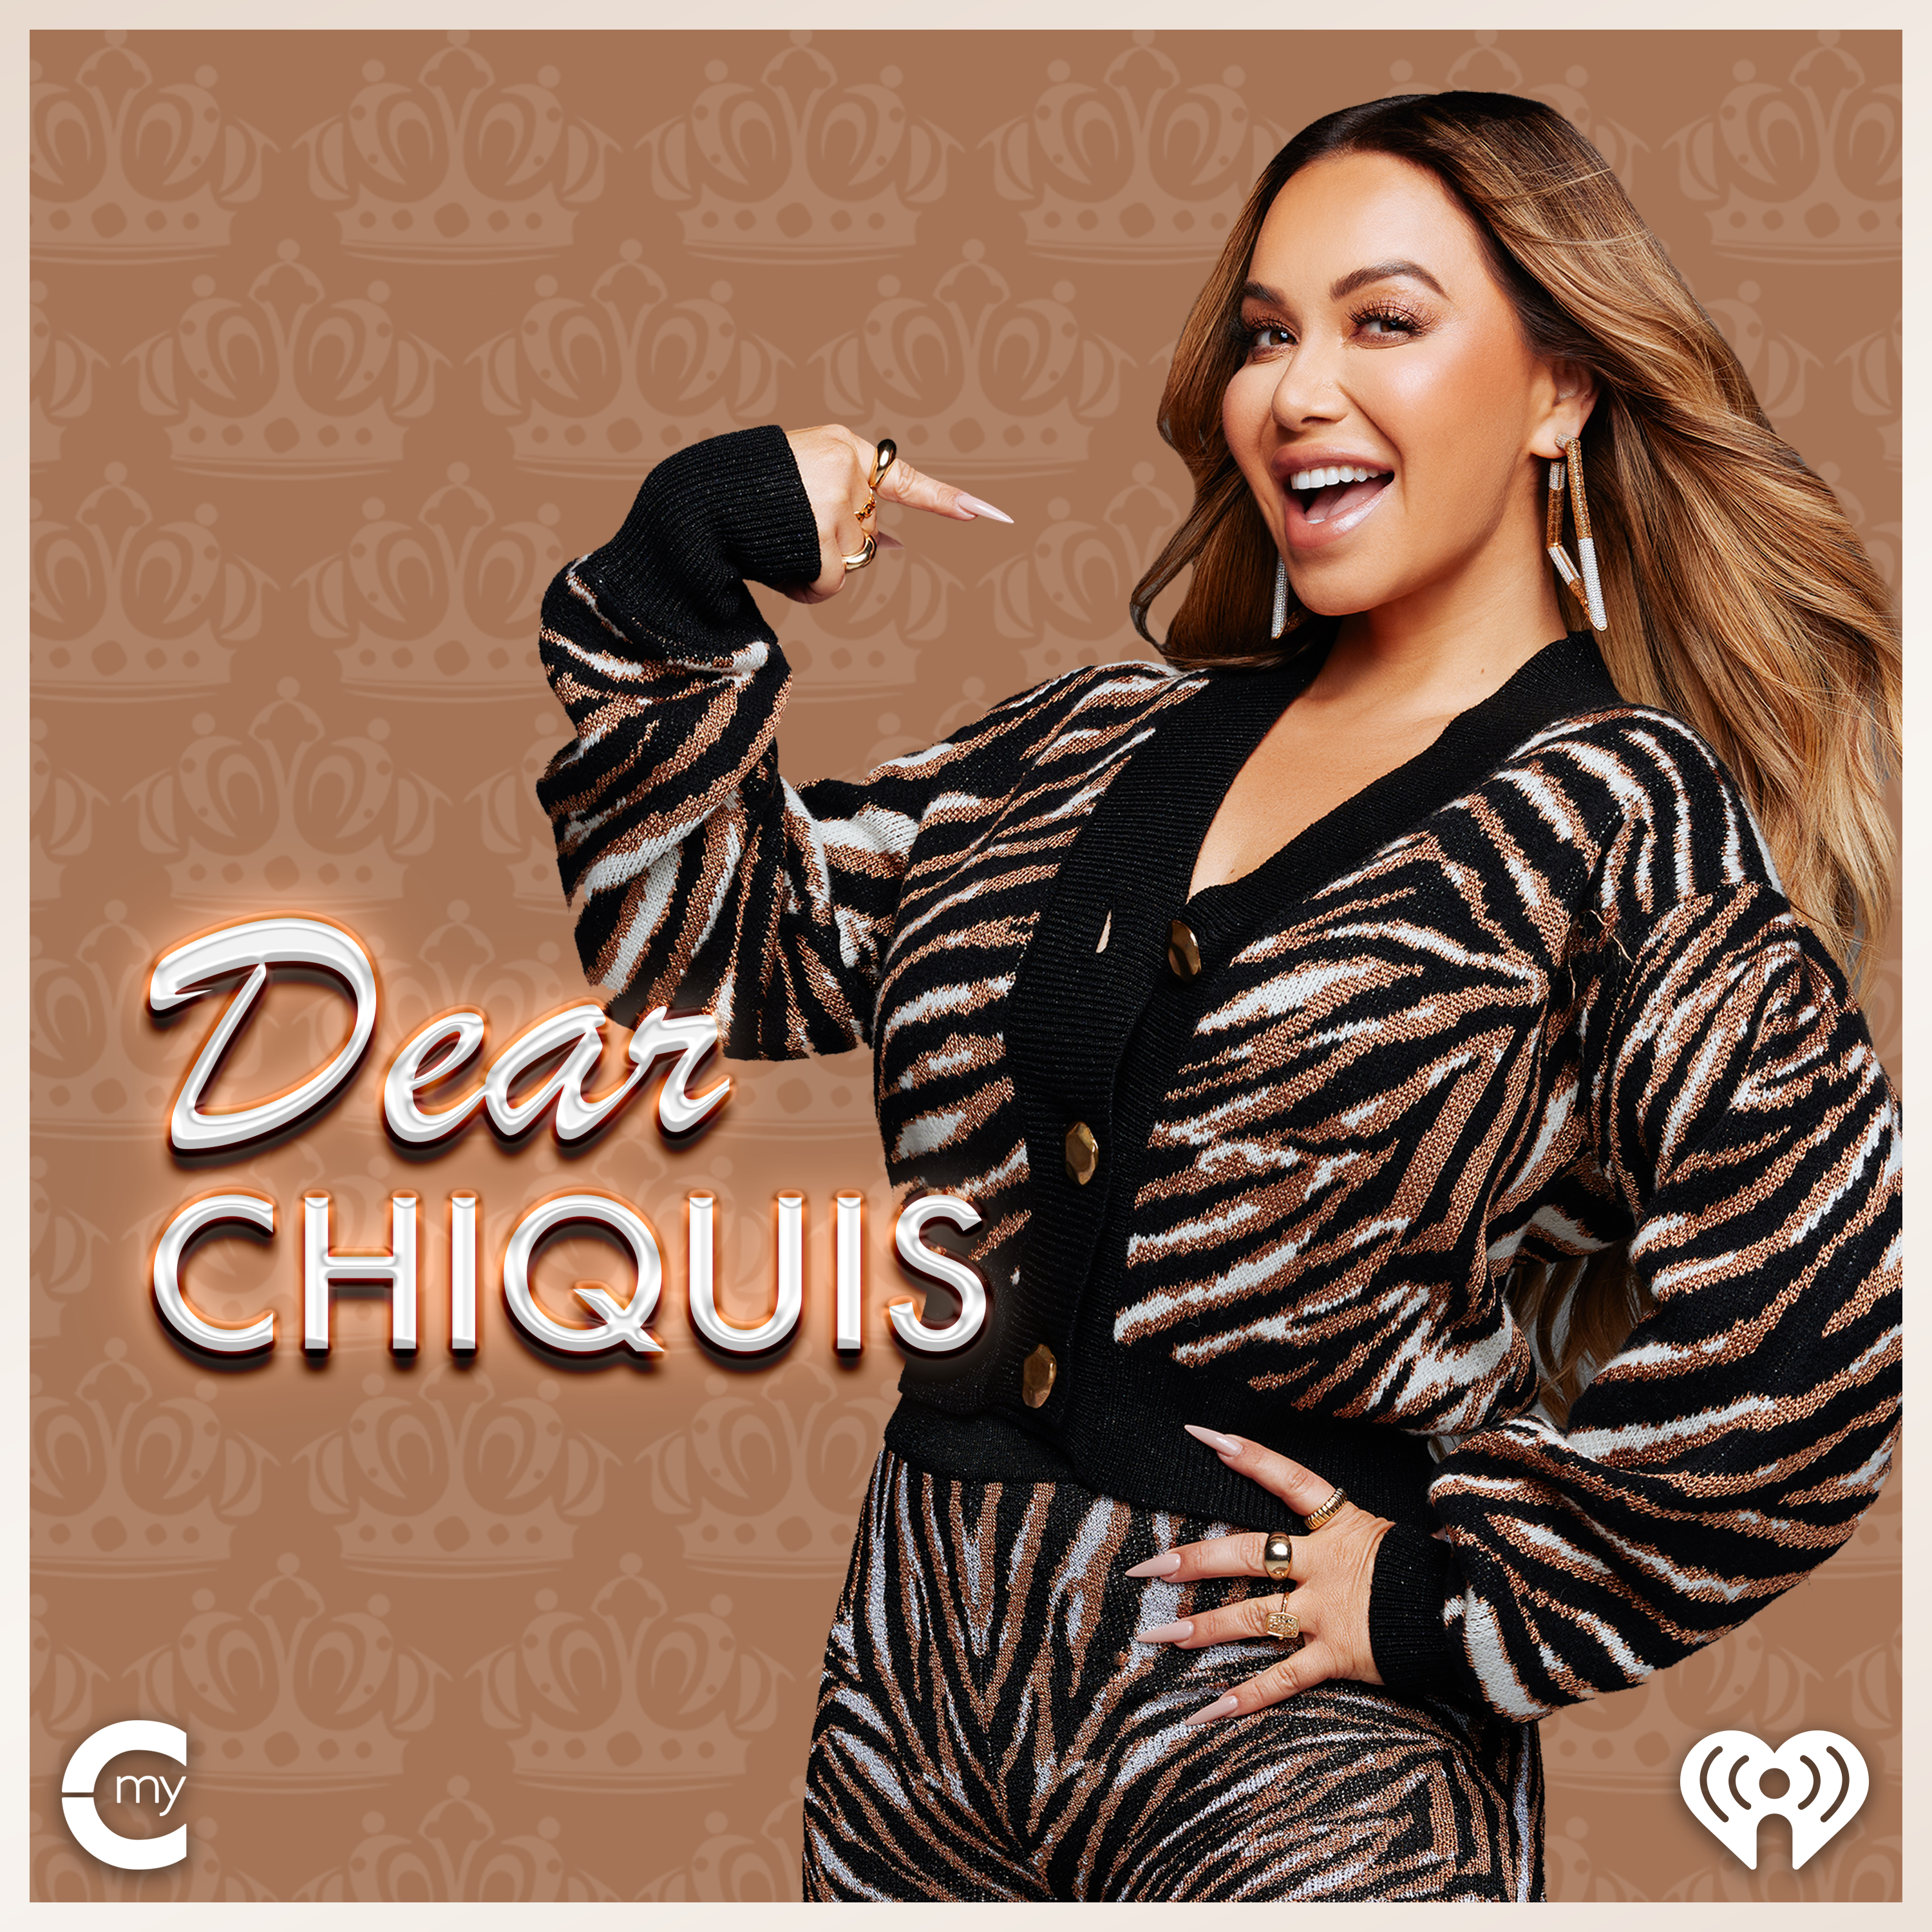 Dear Chiquis: I Want My Fiancé to Sign a Prenup, Ozempic and Finding Your Self-Worth